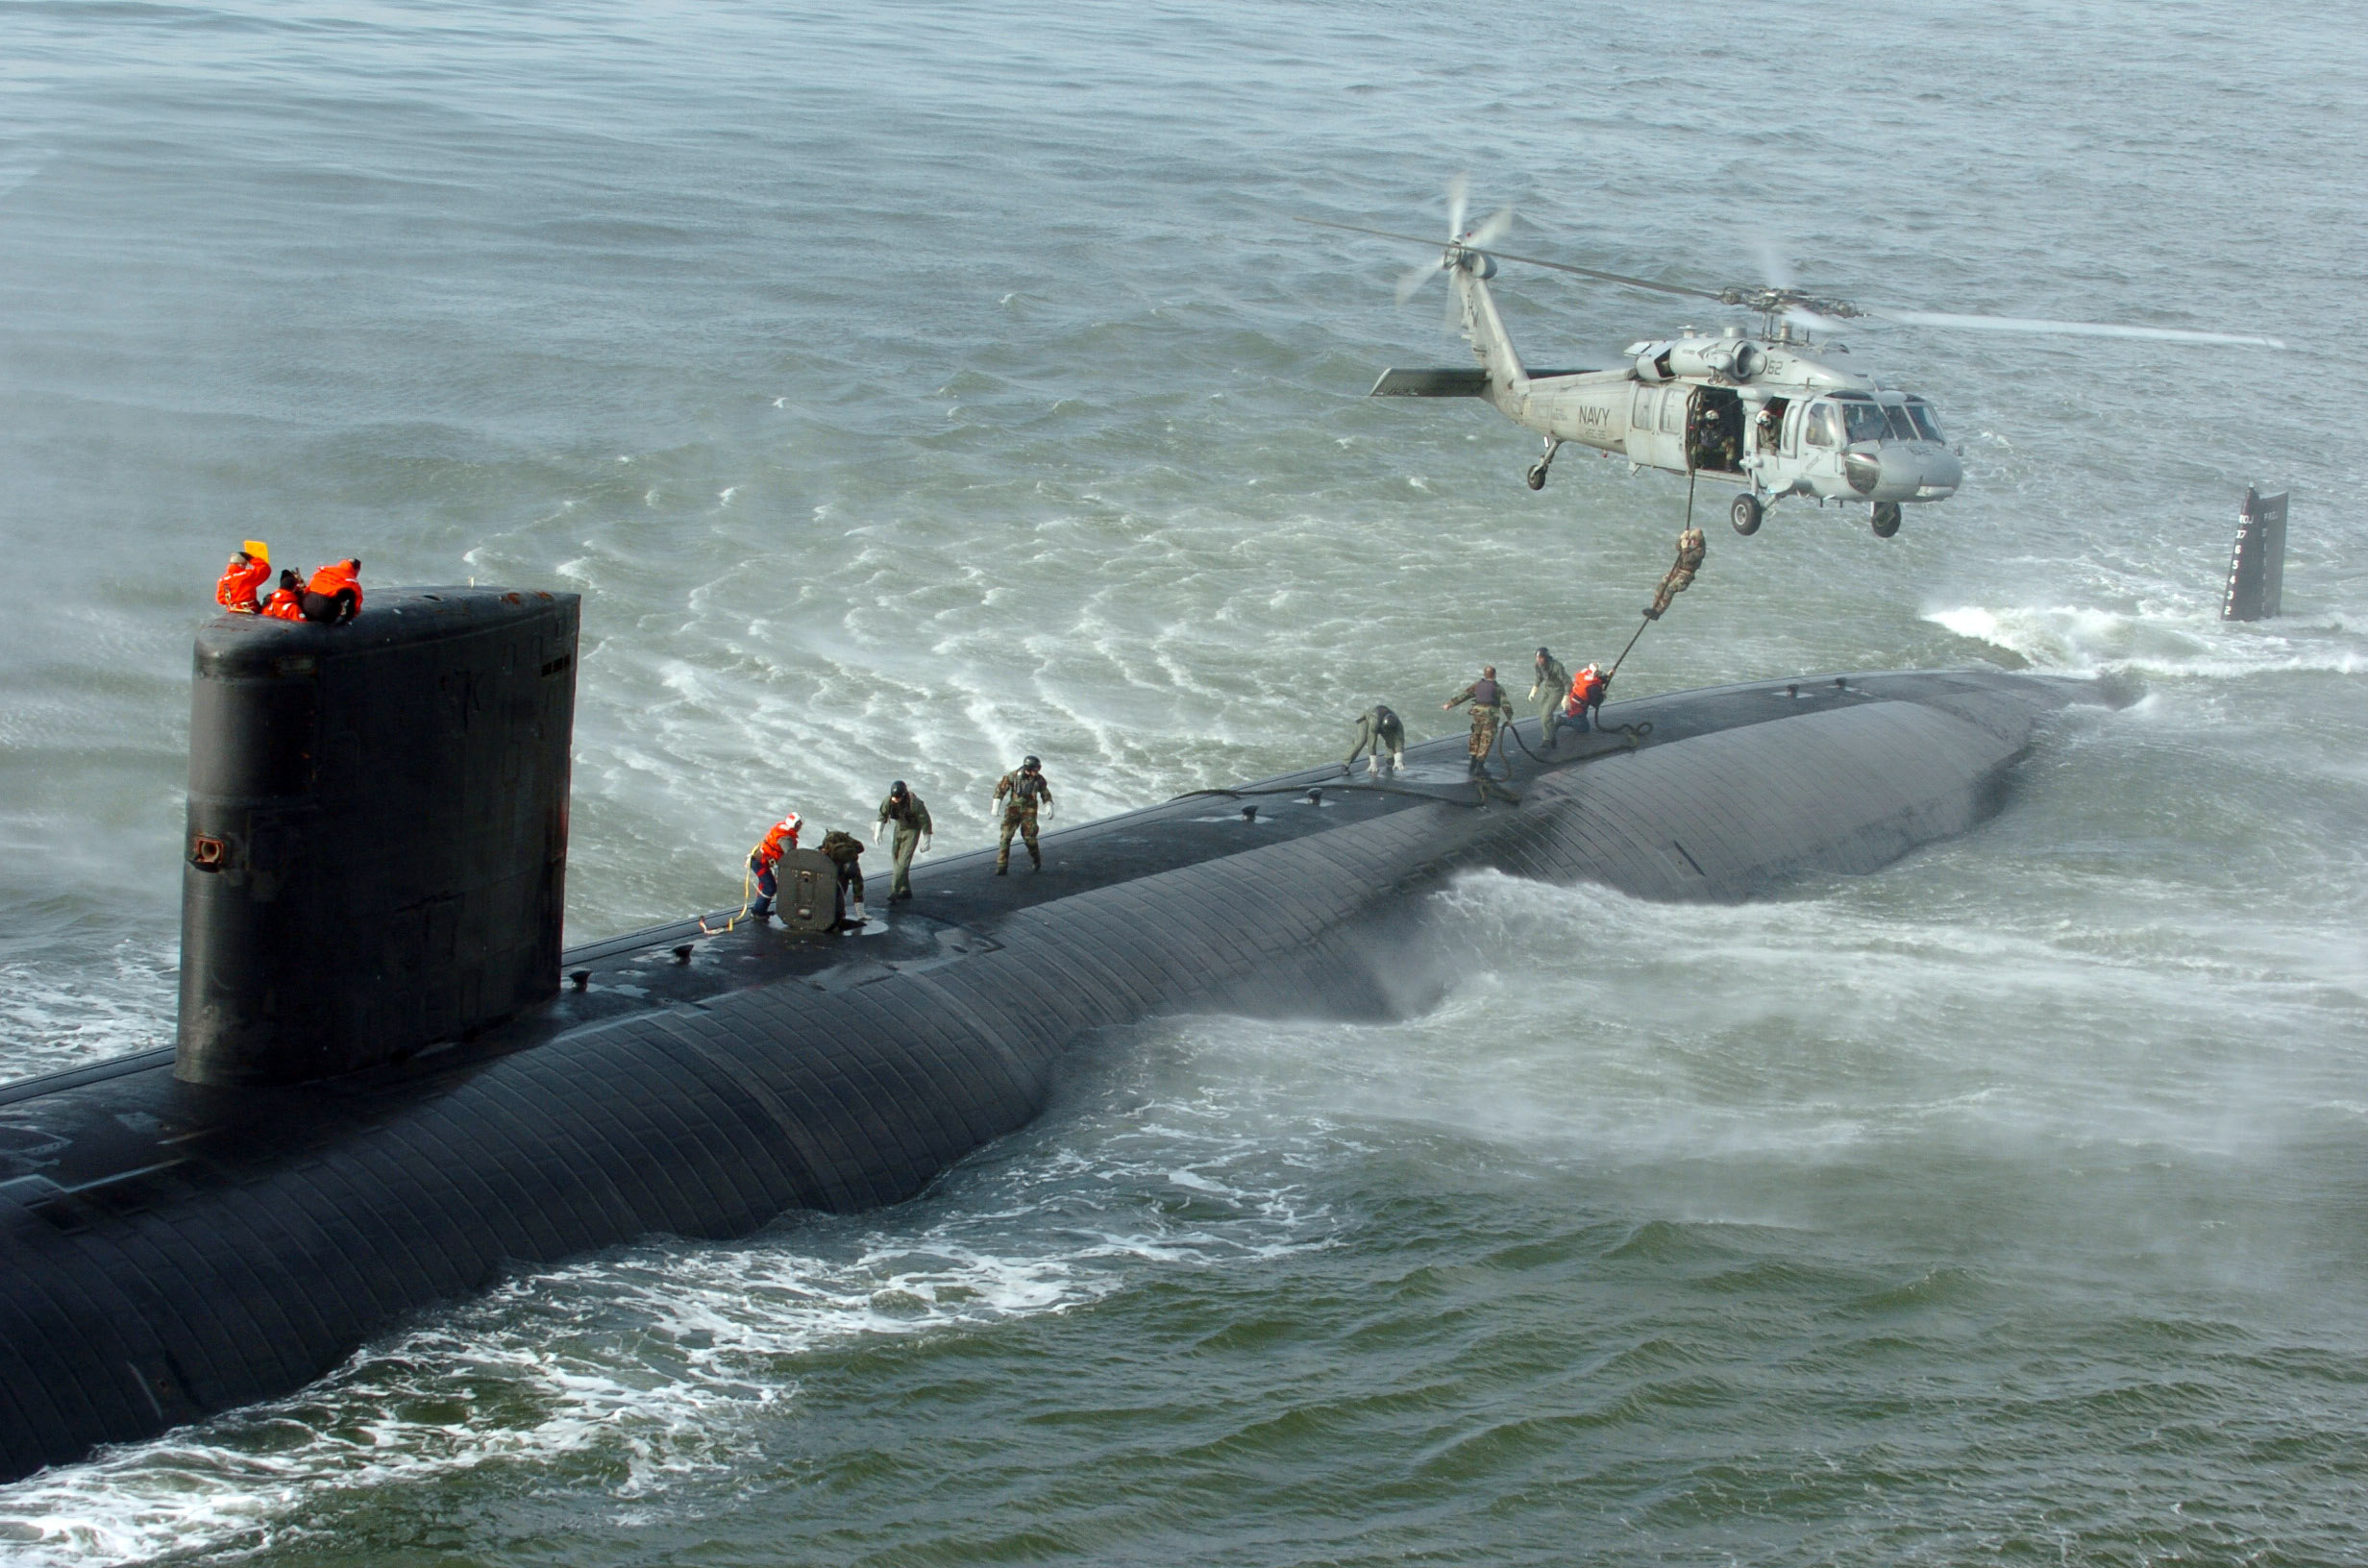 060117-N-3541A-002 Atlantic Coast (Jan. 17, 2005) Ð A SEAL delivery vehicle team (SDV) perform a fast-roping exercise from a MH-60S Seahawk helicopter to the topside of Los Angeles-class submarine USS Toledo (SSN 769). The mission of the SDV teams includes clandestine insertion of SEALs, ordnance delivery, reconnaissance, and locating and the recovery of objects. U.S. Navy photo by Journalist 3rd Class Davis J. Anderson (RELEASED)